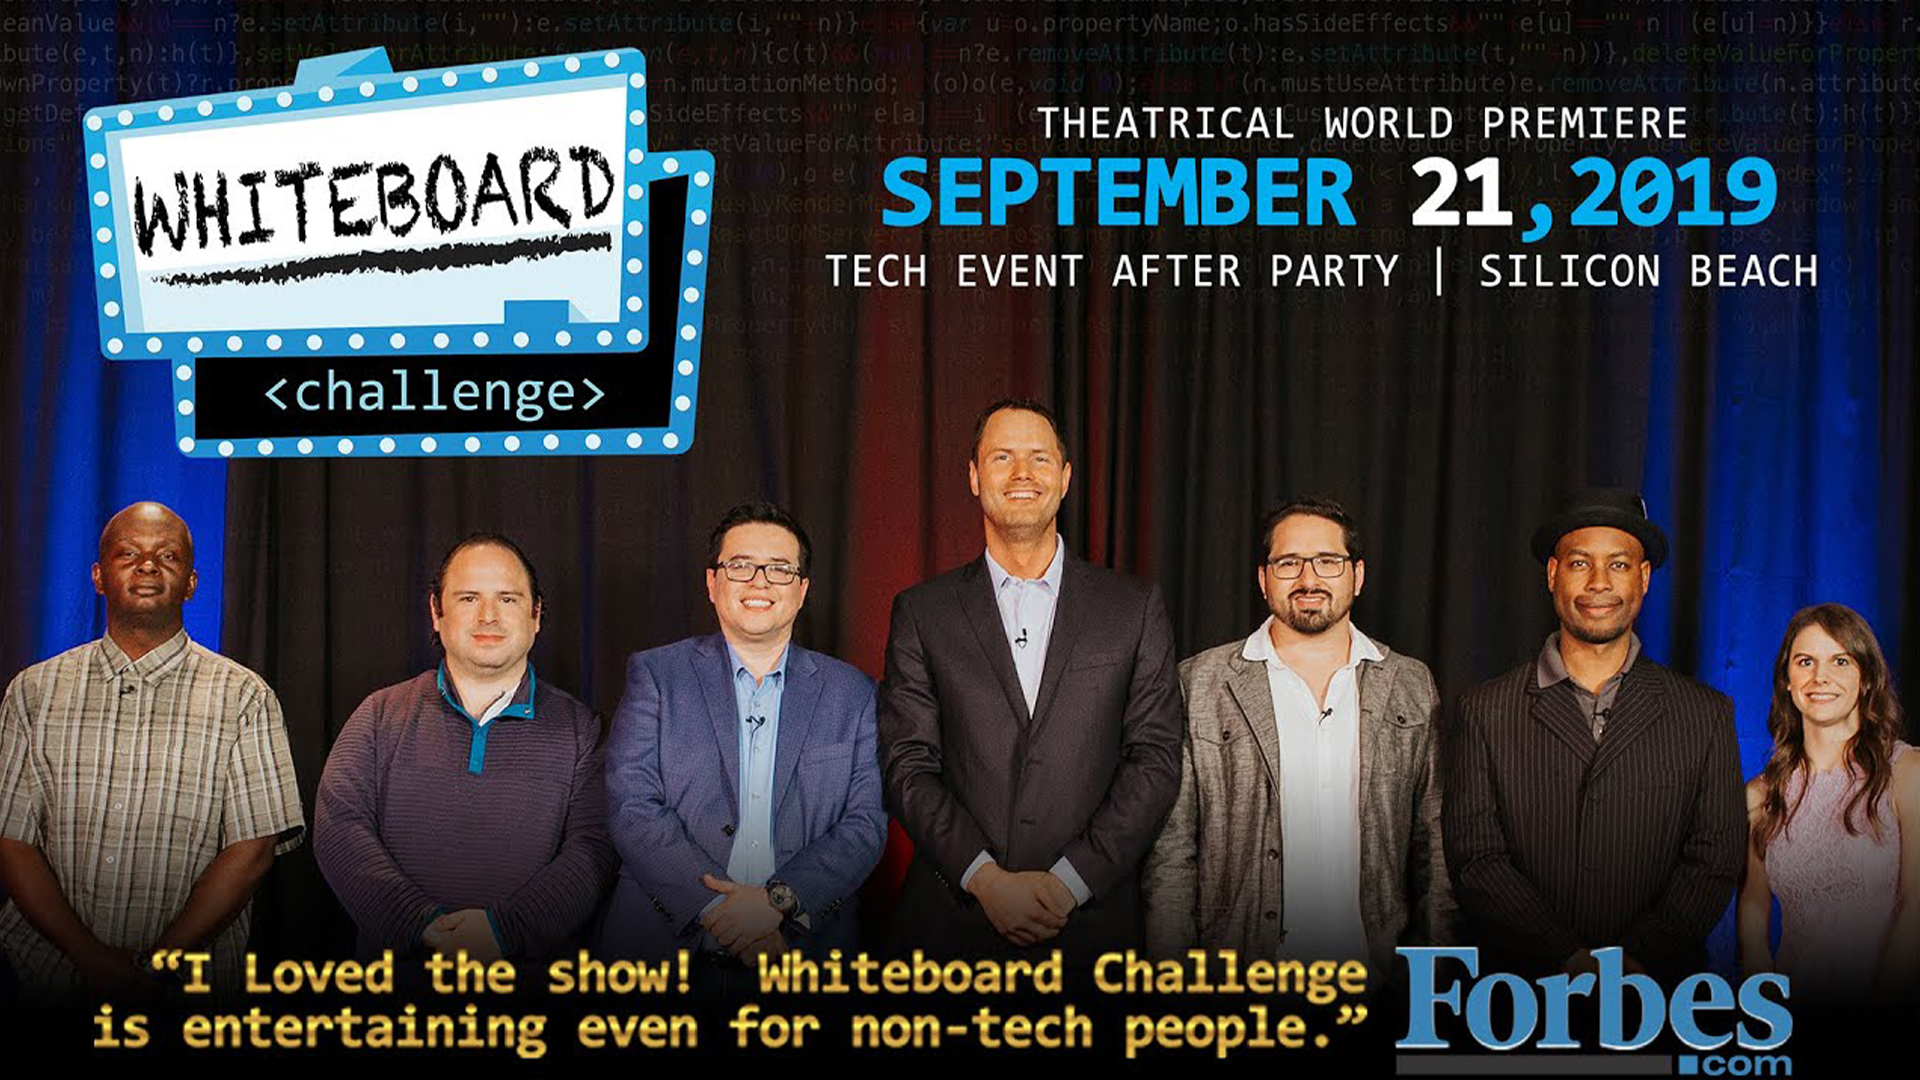 Theatrical Trailer for the Premiere of "Whiteboard Challenge"